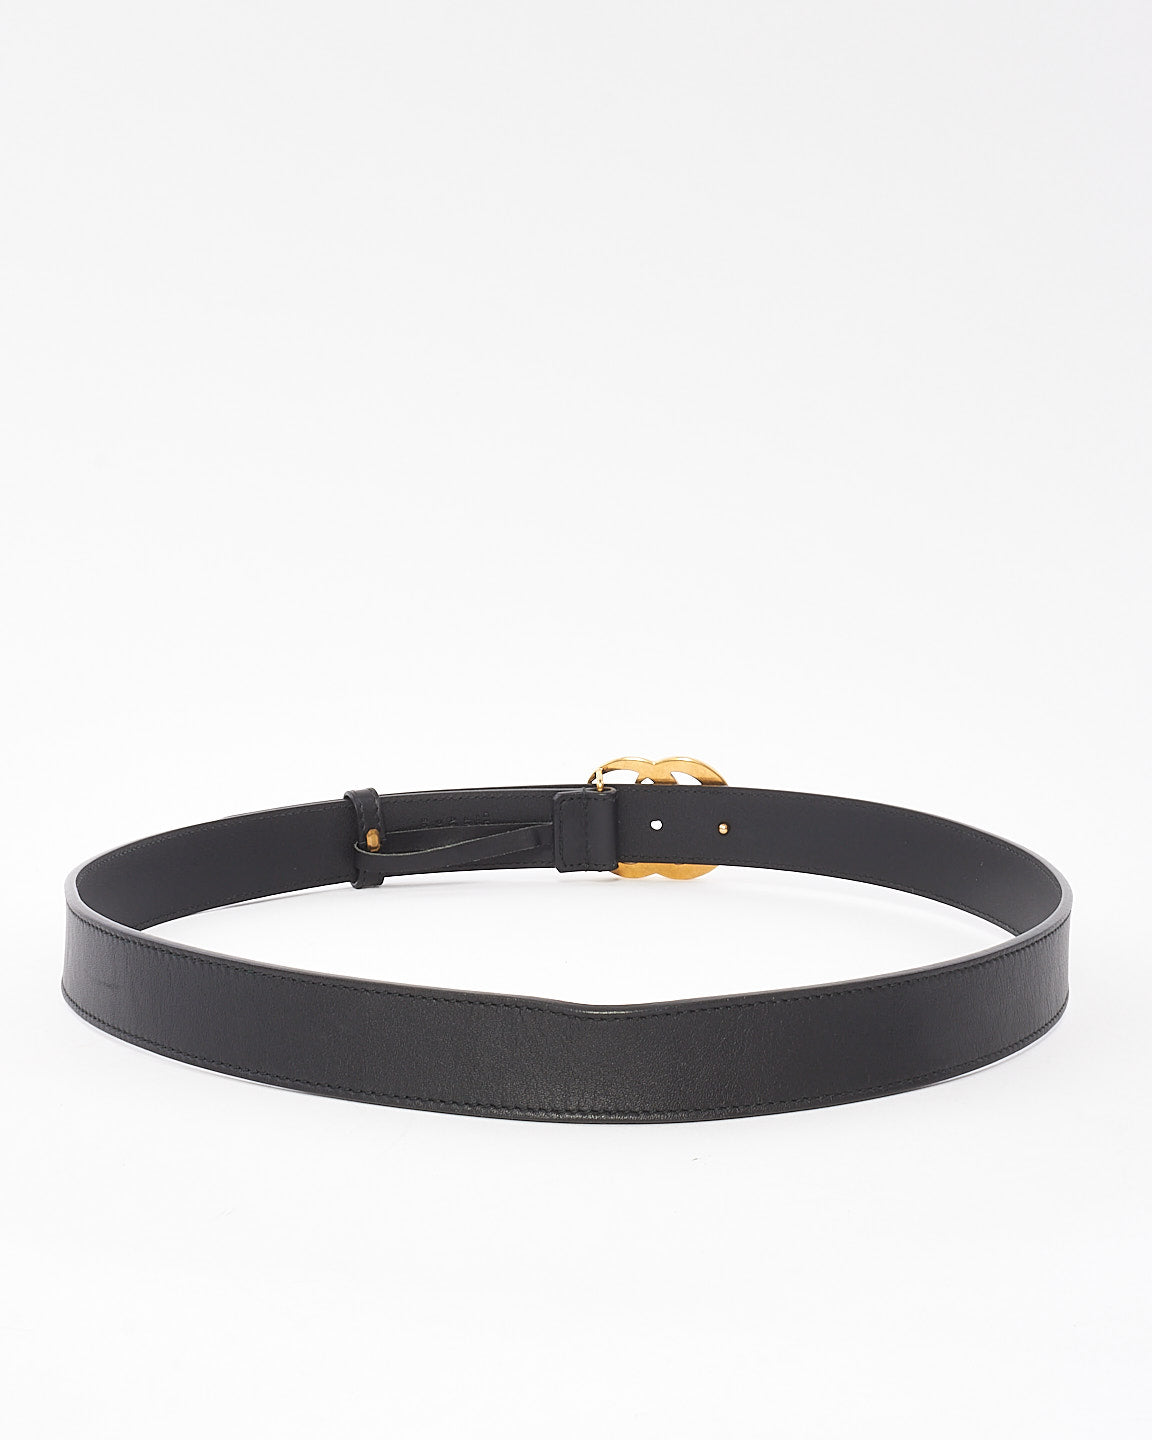 Gucci Black GG Brushed Gold Marmont Thin Belt - 95/38